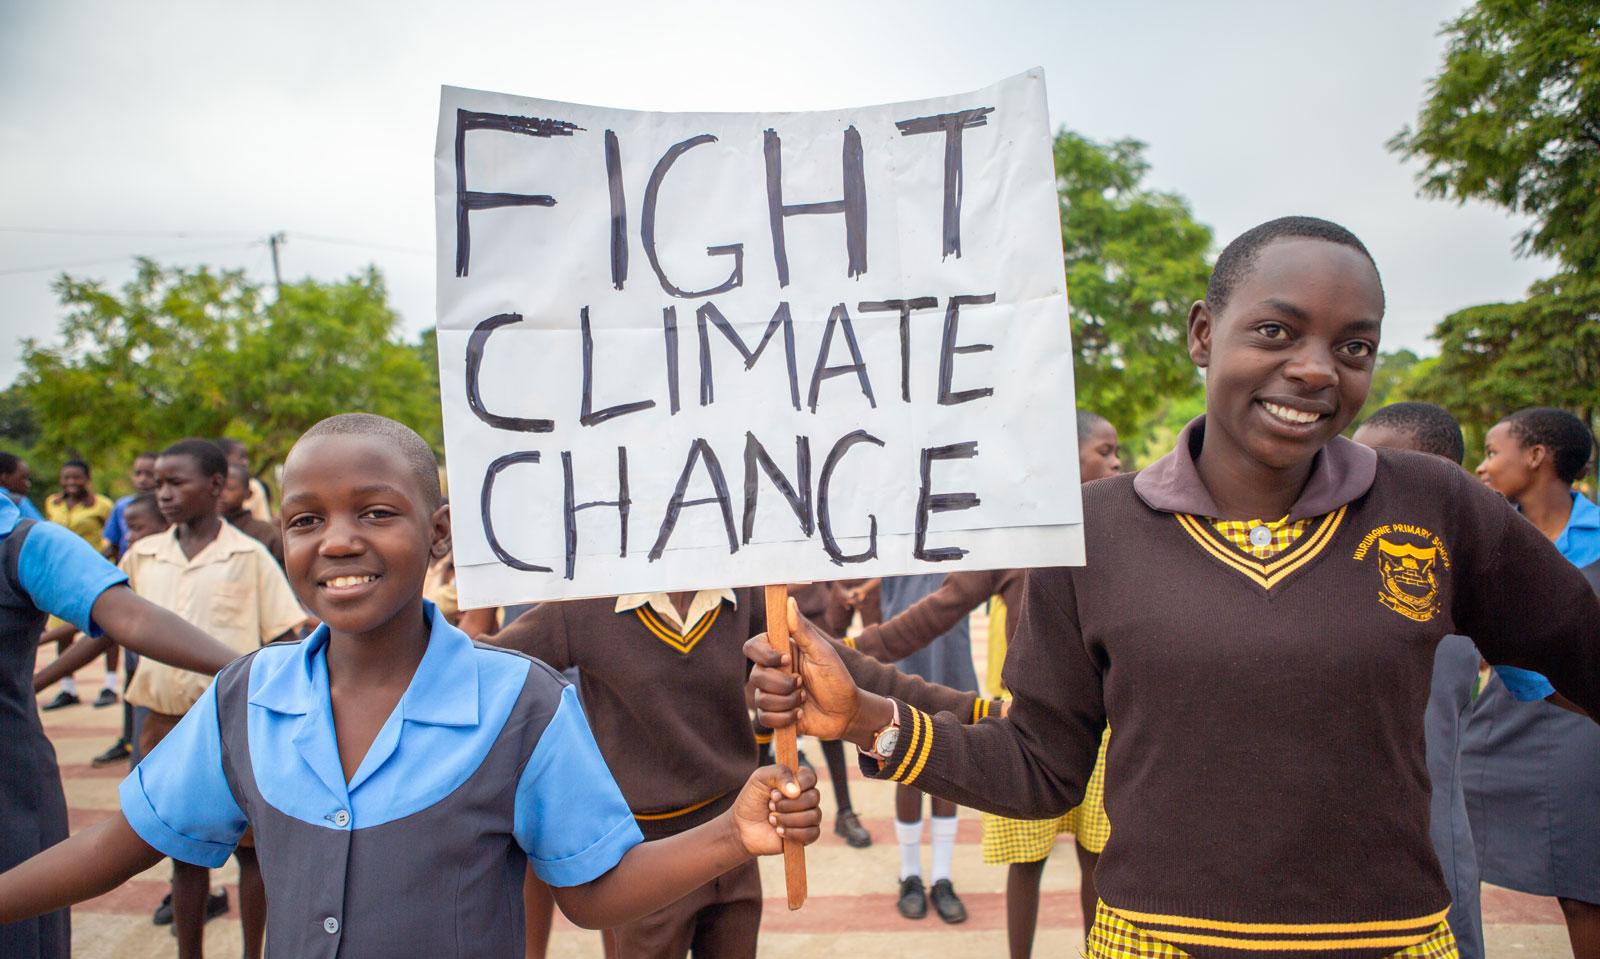 Girls holding sign: Stop Climat Change